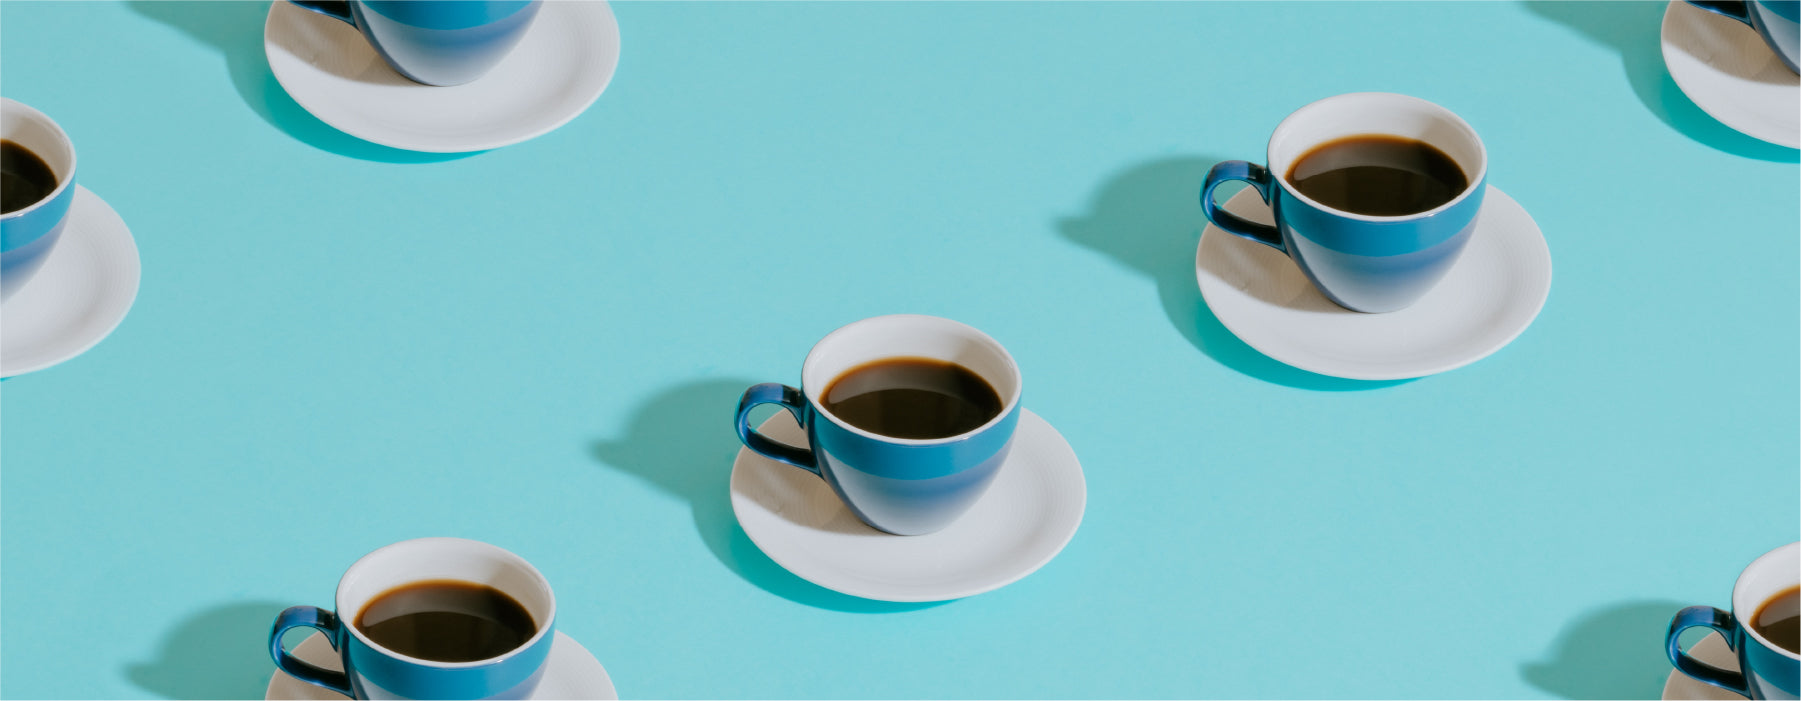 The Many Shapes of Espresso Cups and Their Uses - by Coffee Life, a blog by EspressoWorks